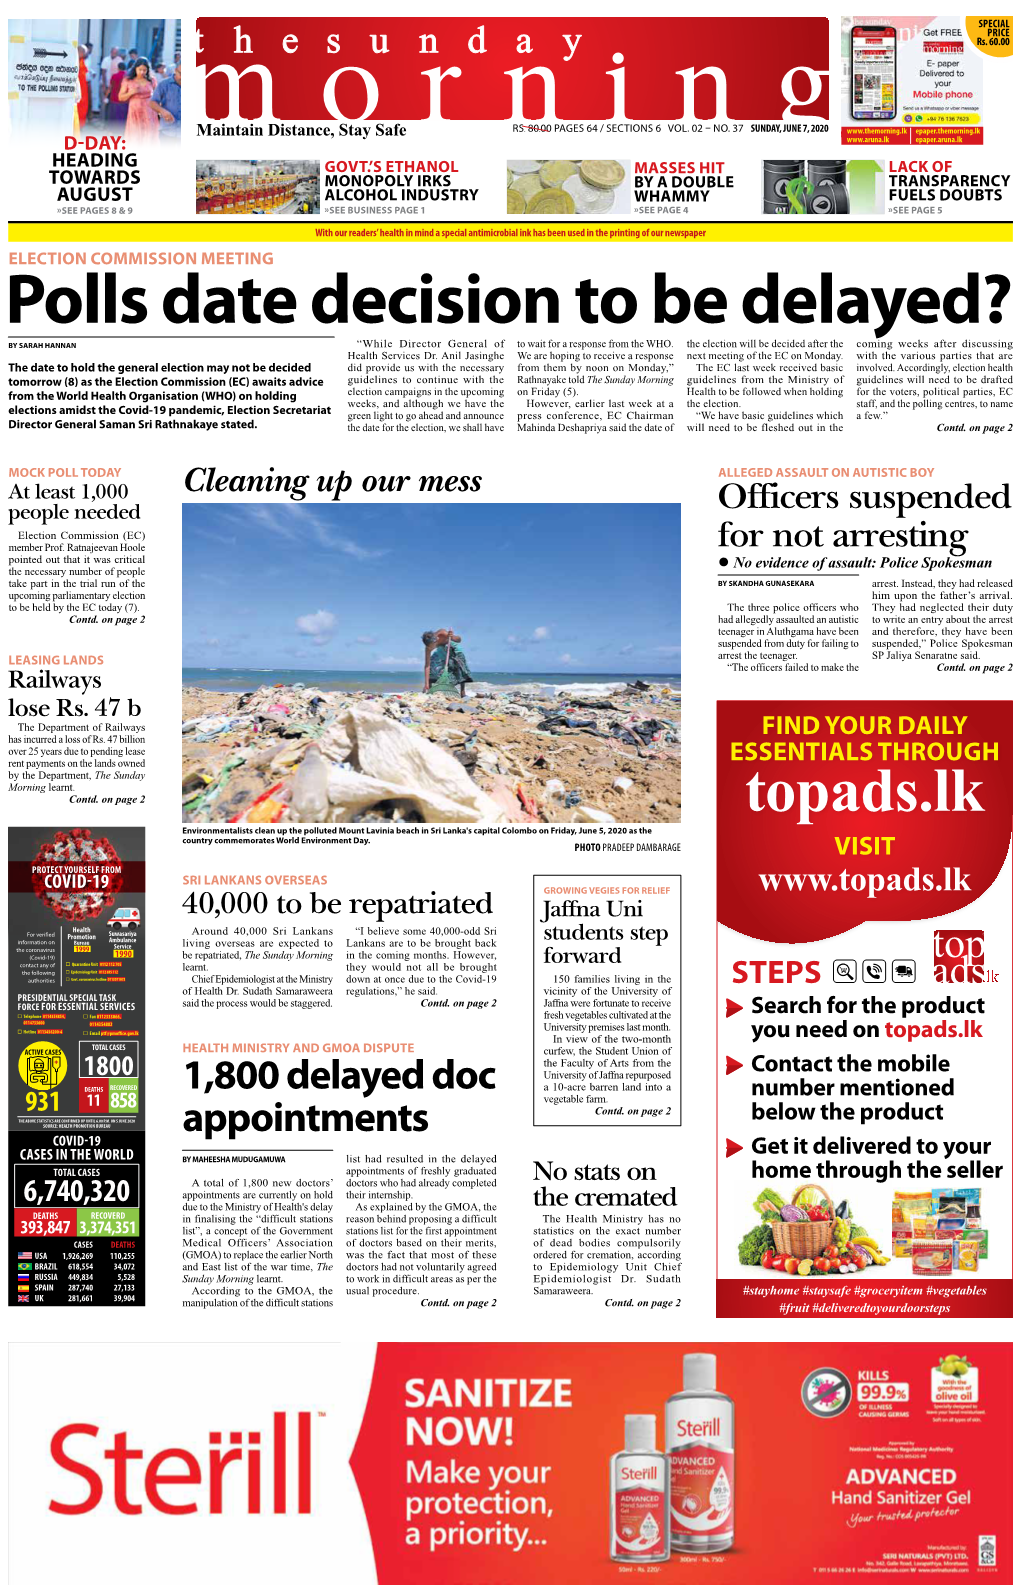 Polls Date Decision to Be Delayed? by SARAH HANNAN “While Director General of to Wait for a Response from the WHO